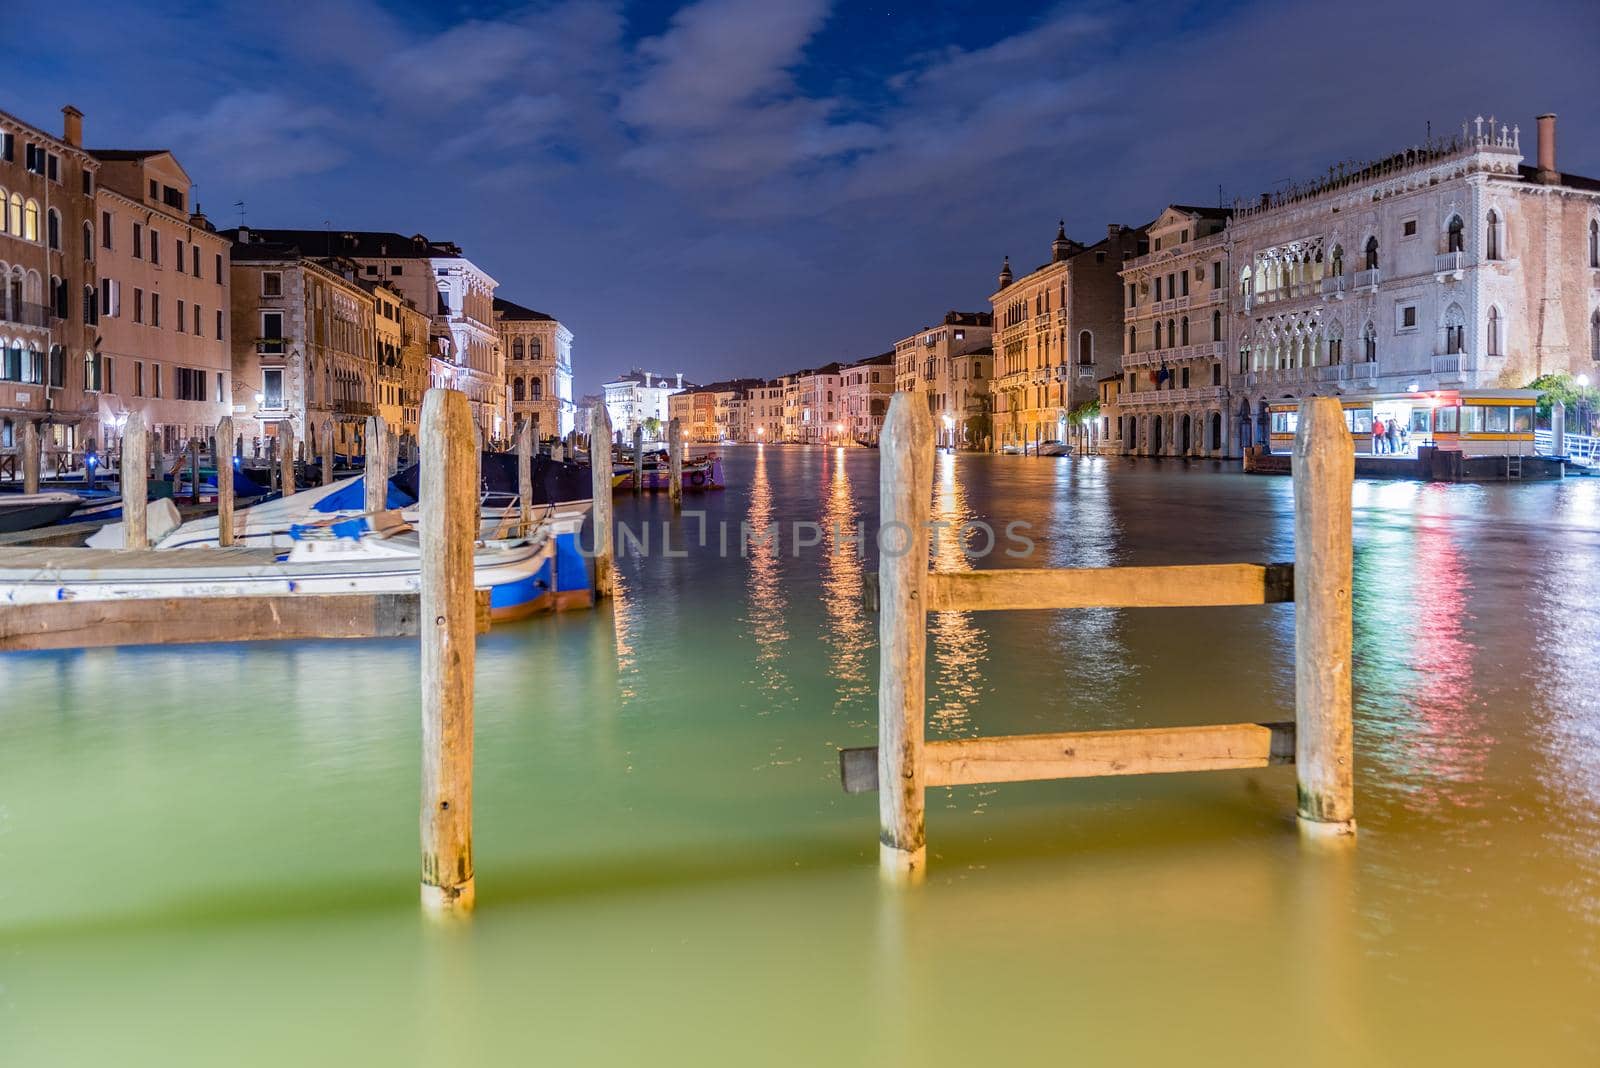 Scenic view at night over the Grand Canal, Venice, Italy by marcorubino